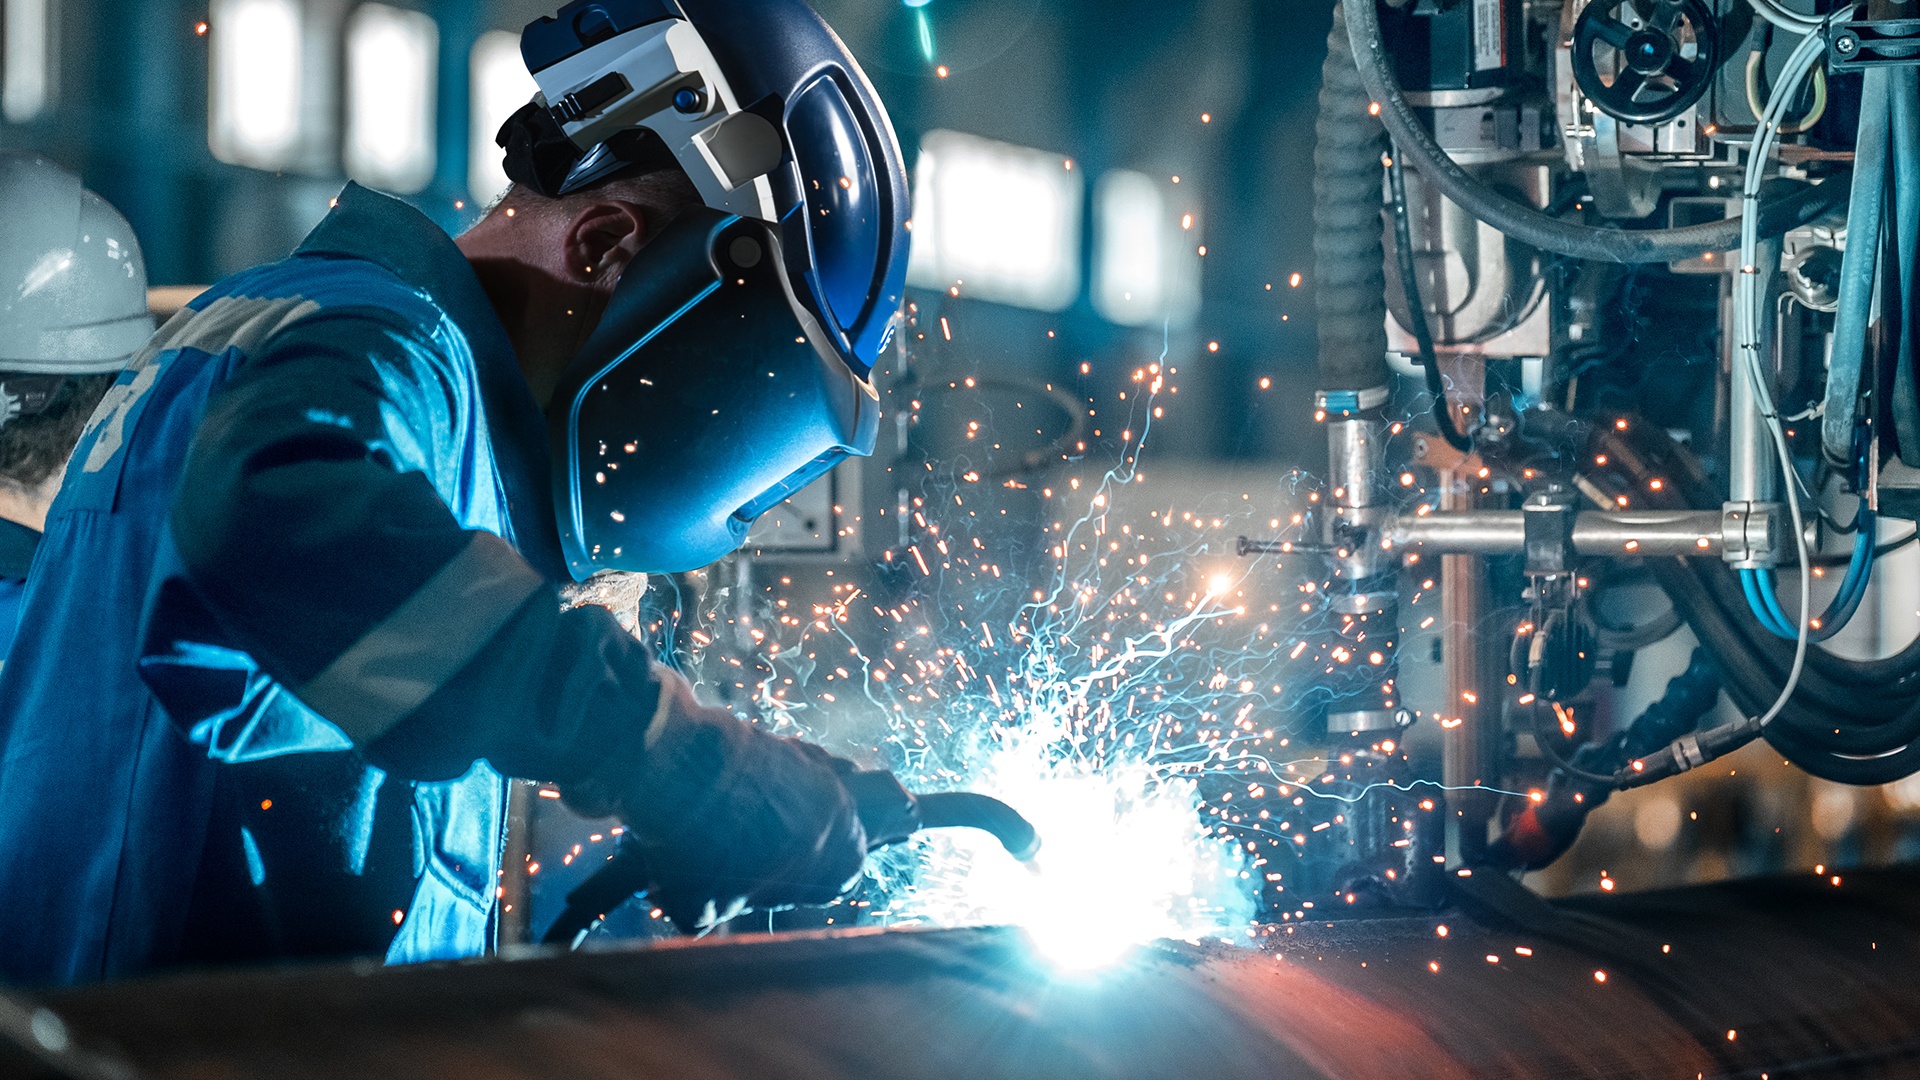 Experience the New Standard in Welding Safety